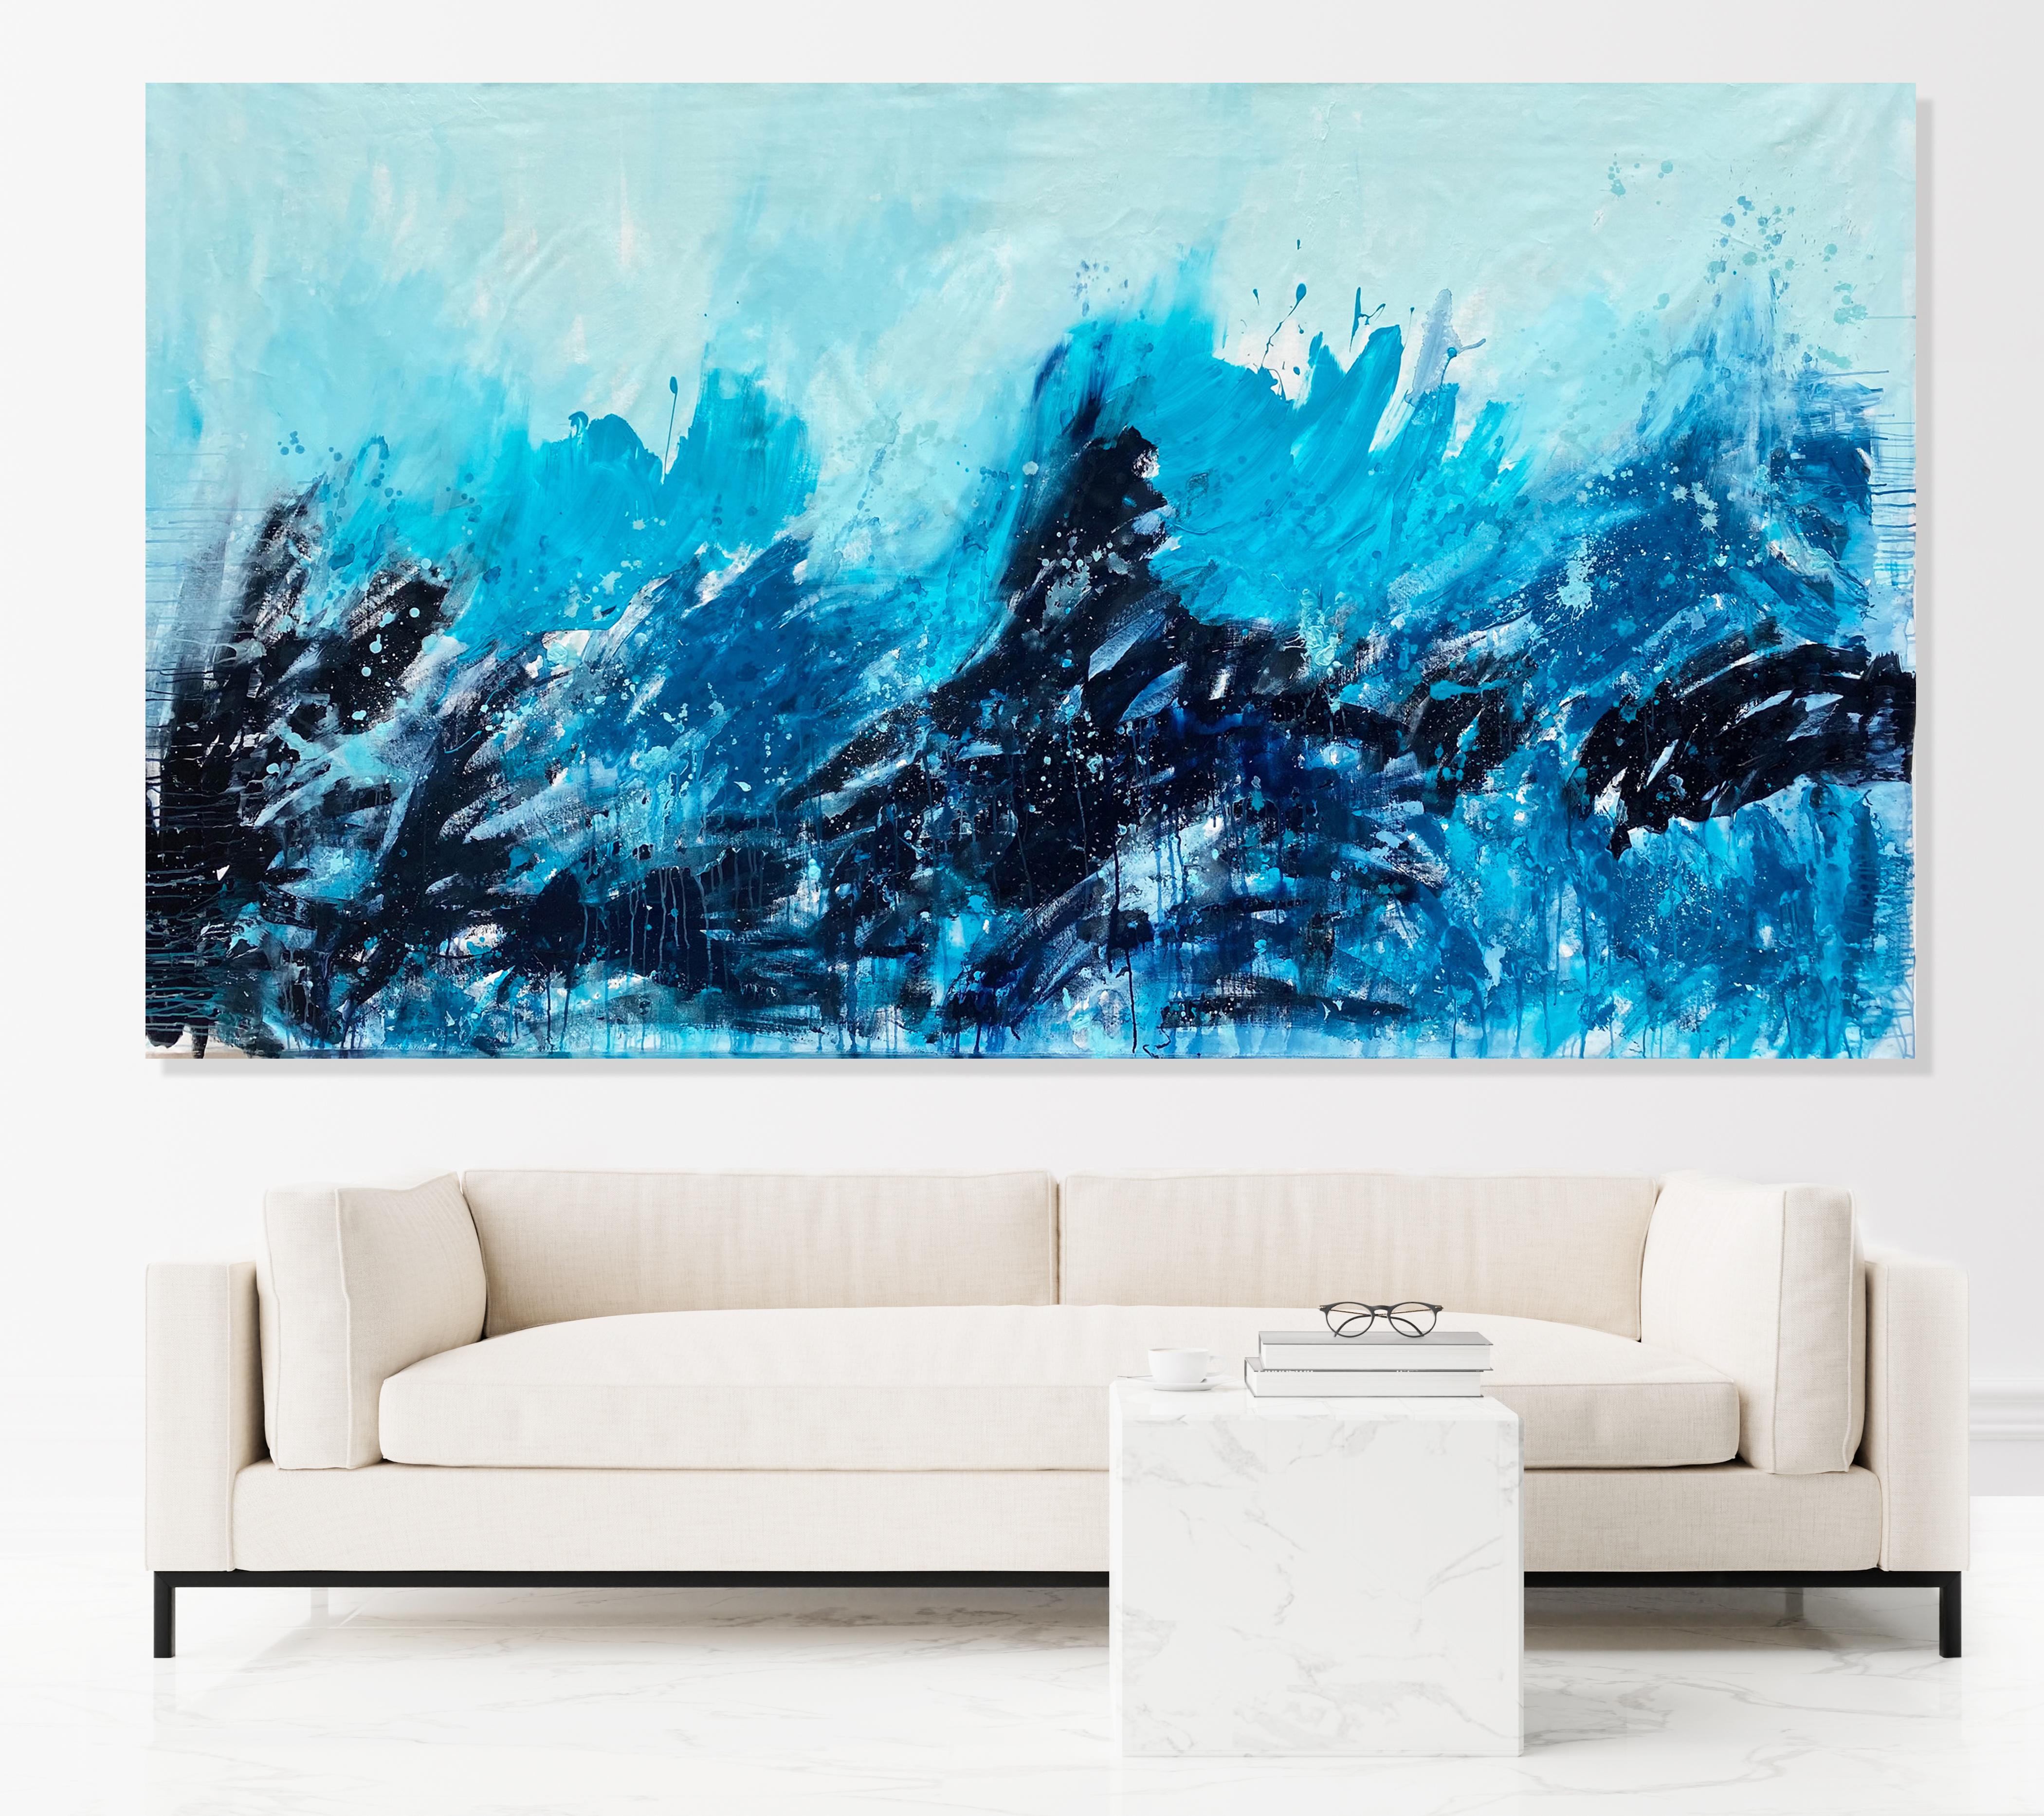 Not Drowning Waving large statement art abstract expression painting ocean blue - Painting by Kathleen Rhee